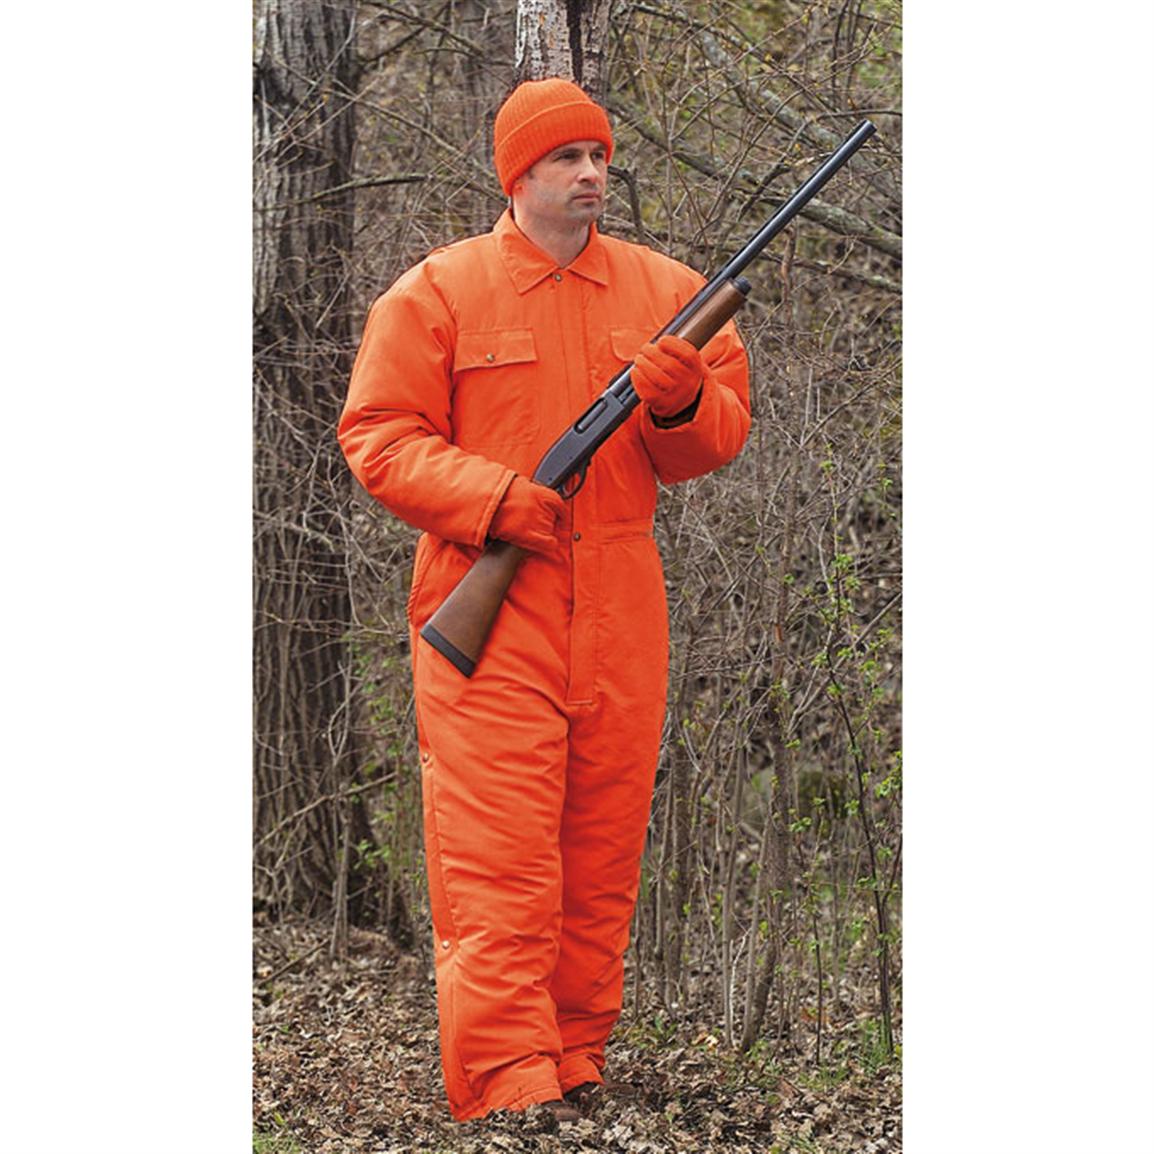 Details about   New WALLS Orange Insulated Coveralls G15230OG Extremely Warm Med Extra Tall 